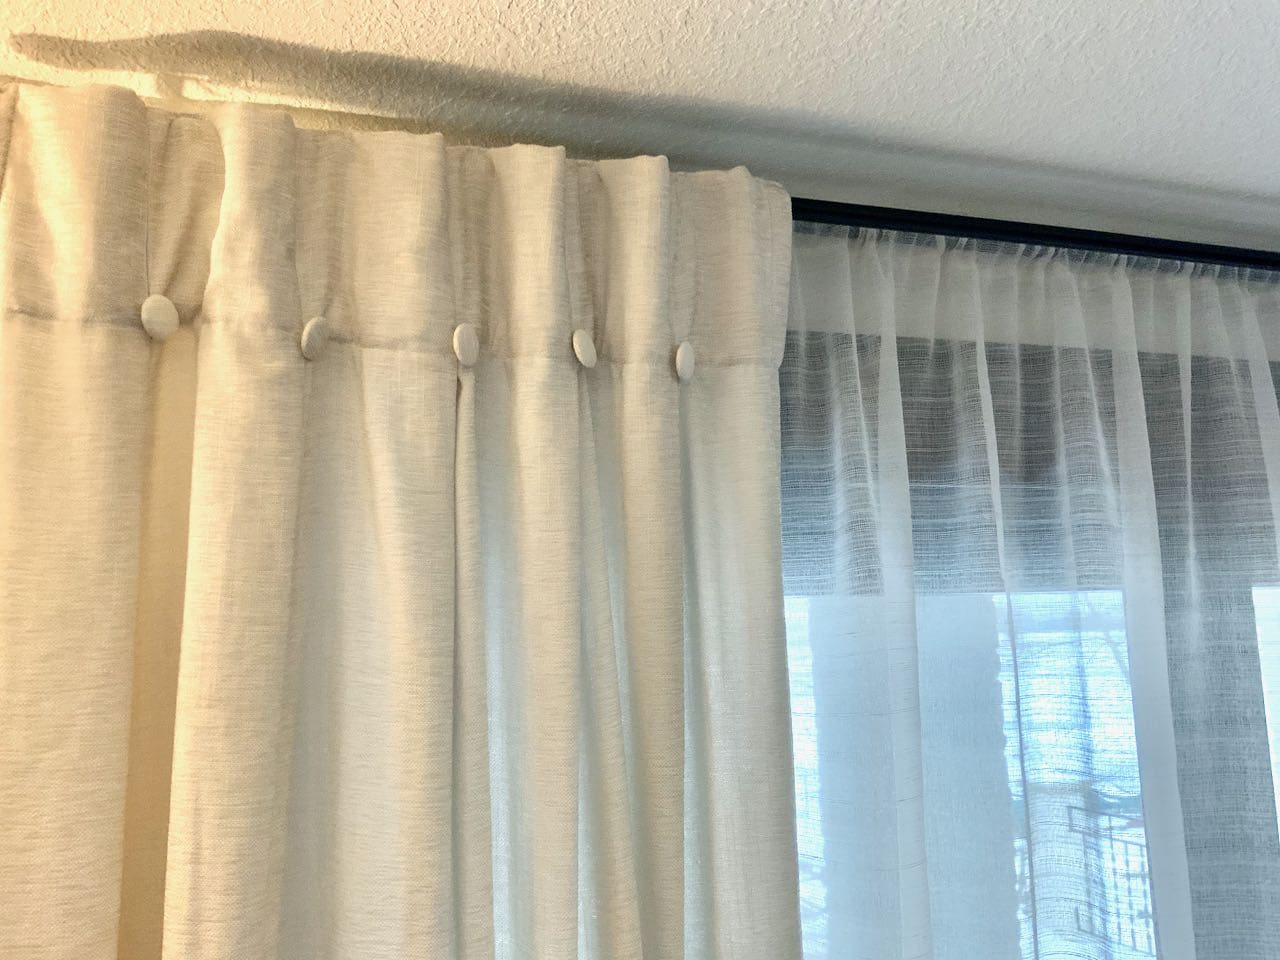 Stationary Curtain Panel on a rod with sheer curtains on a rod behind up very close to the ceiling